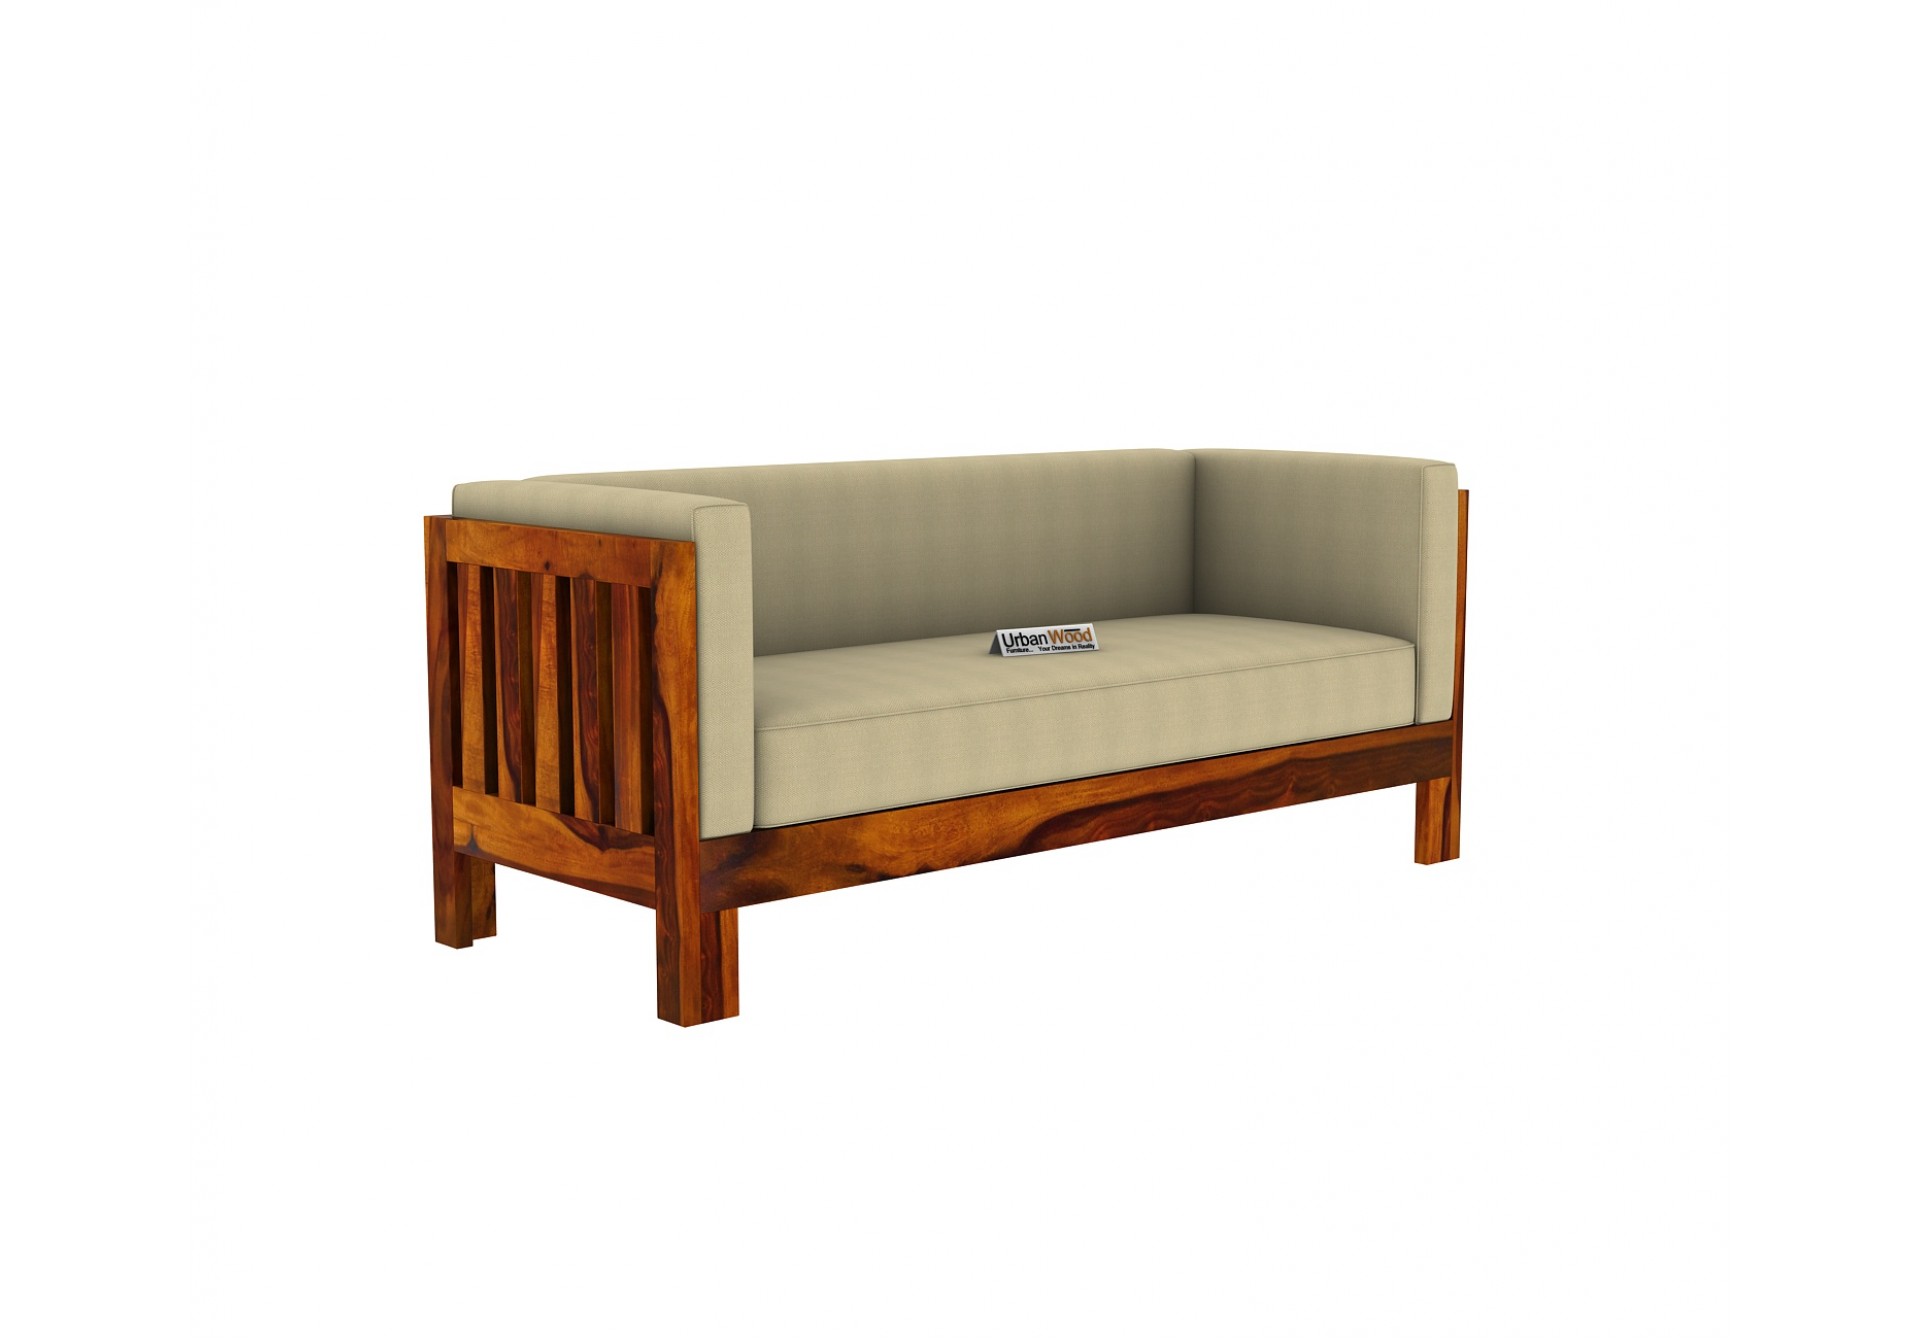 Fitbit Wooden Sofa 3 Seater (Honey Finish)